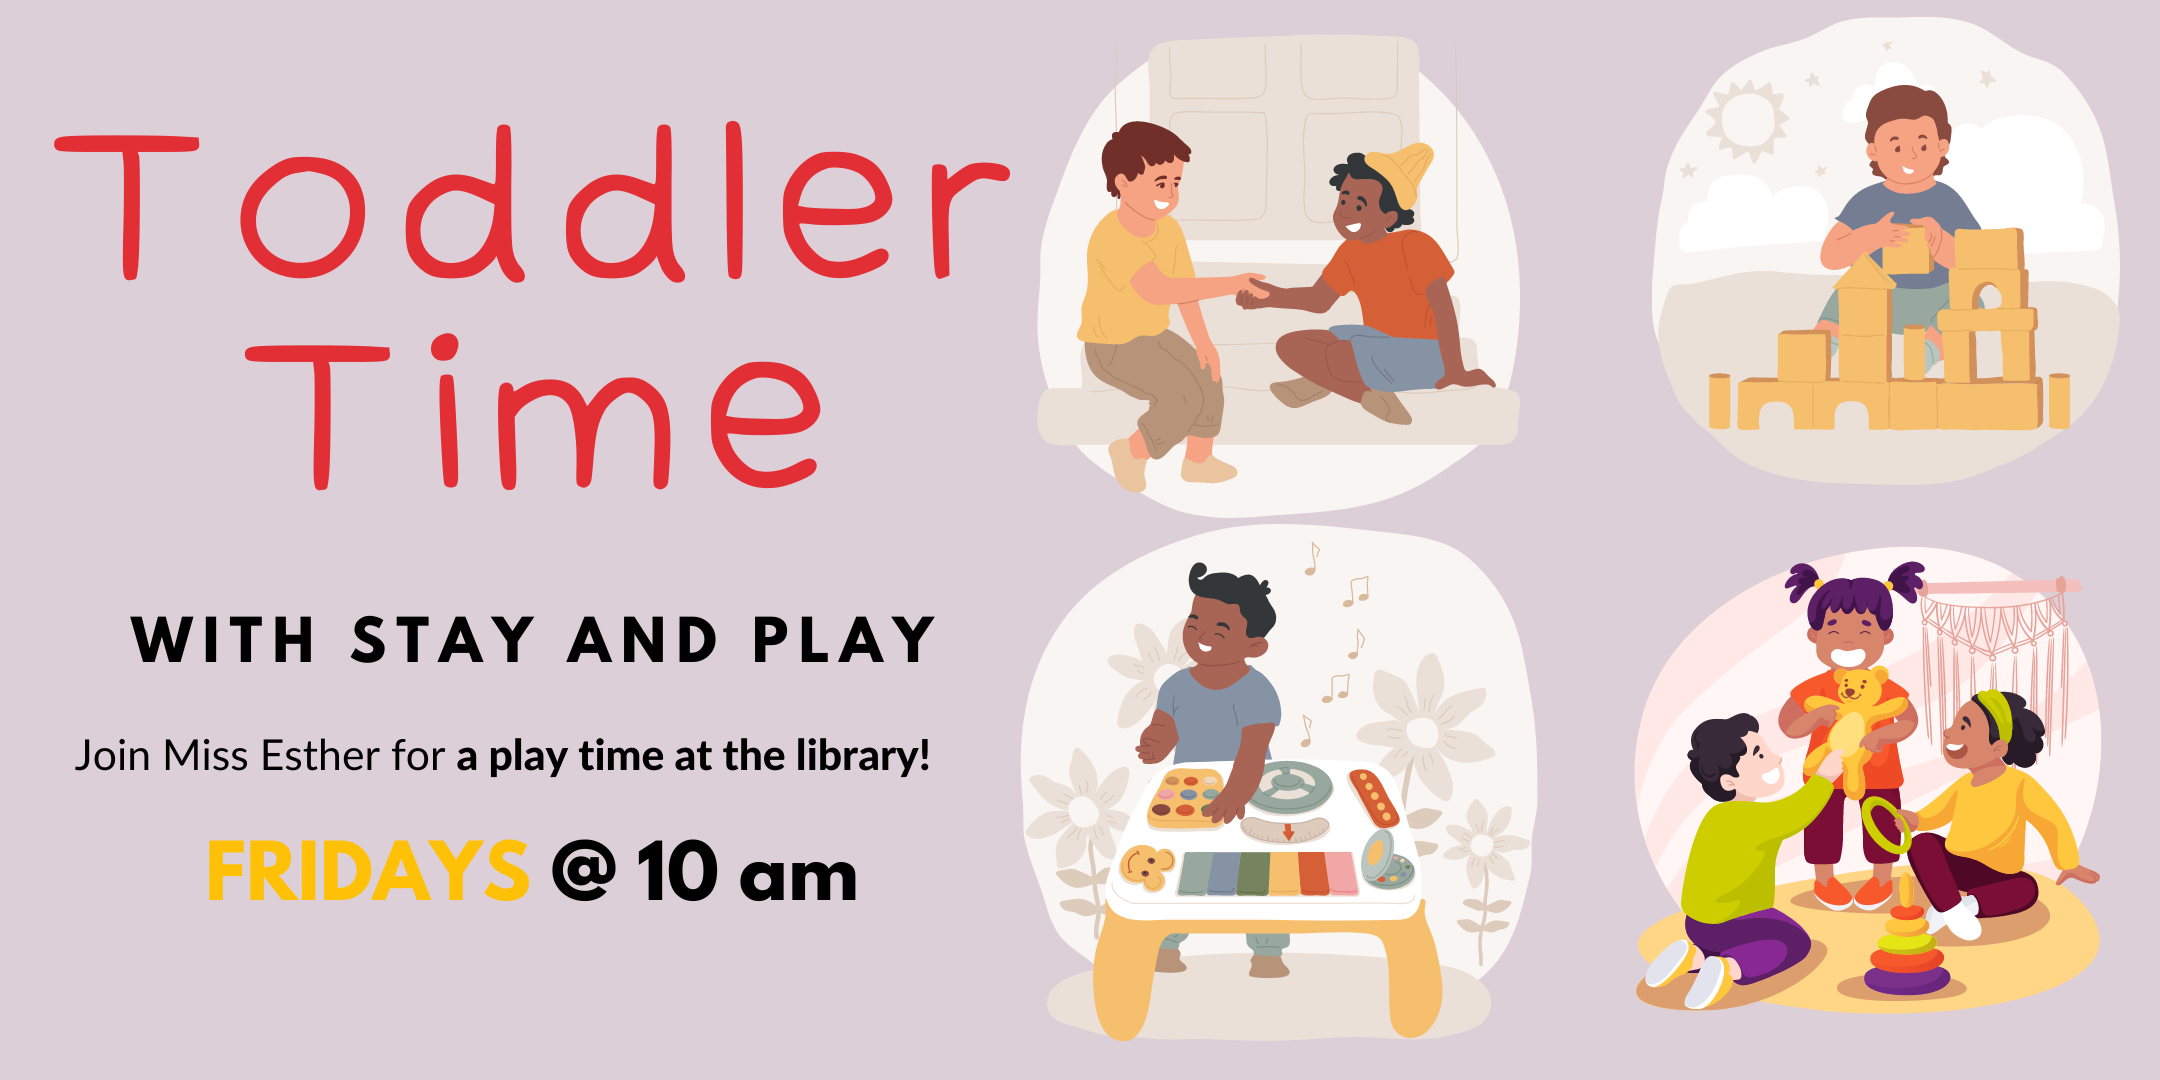 Toddler Time with Stay and Play